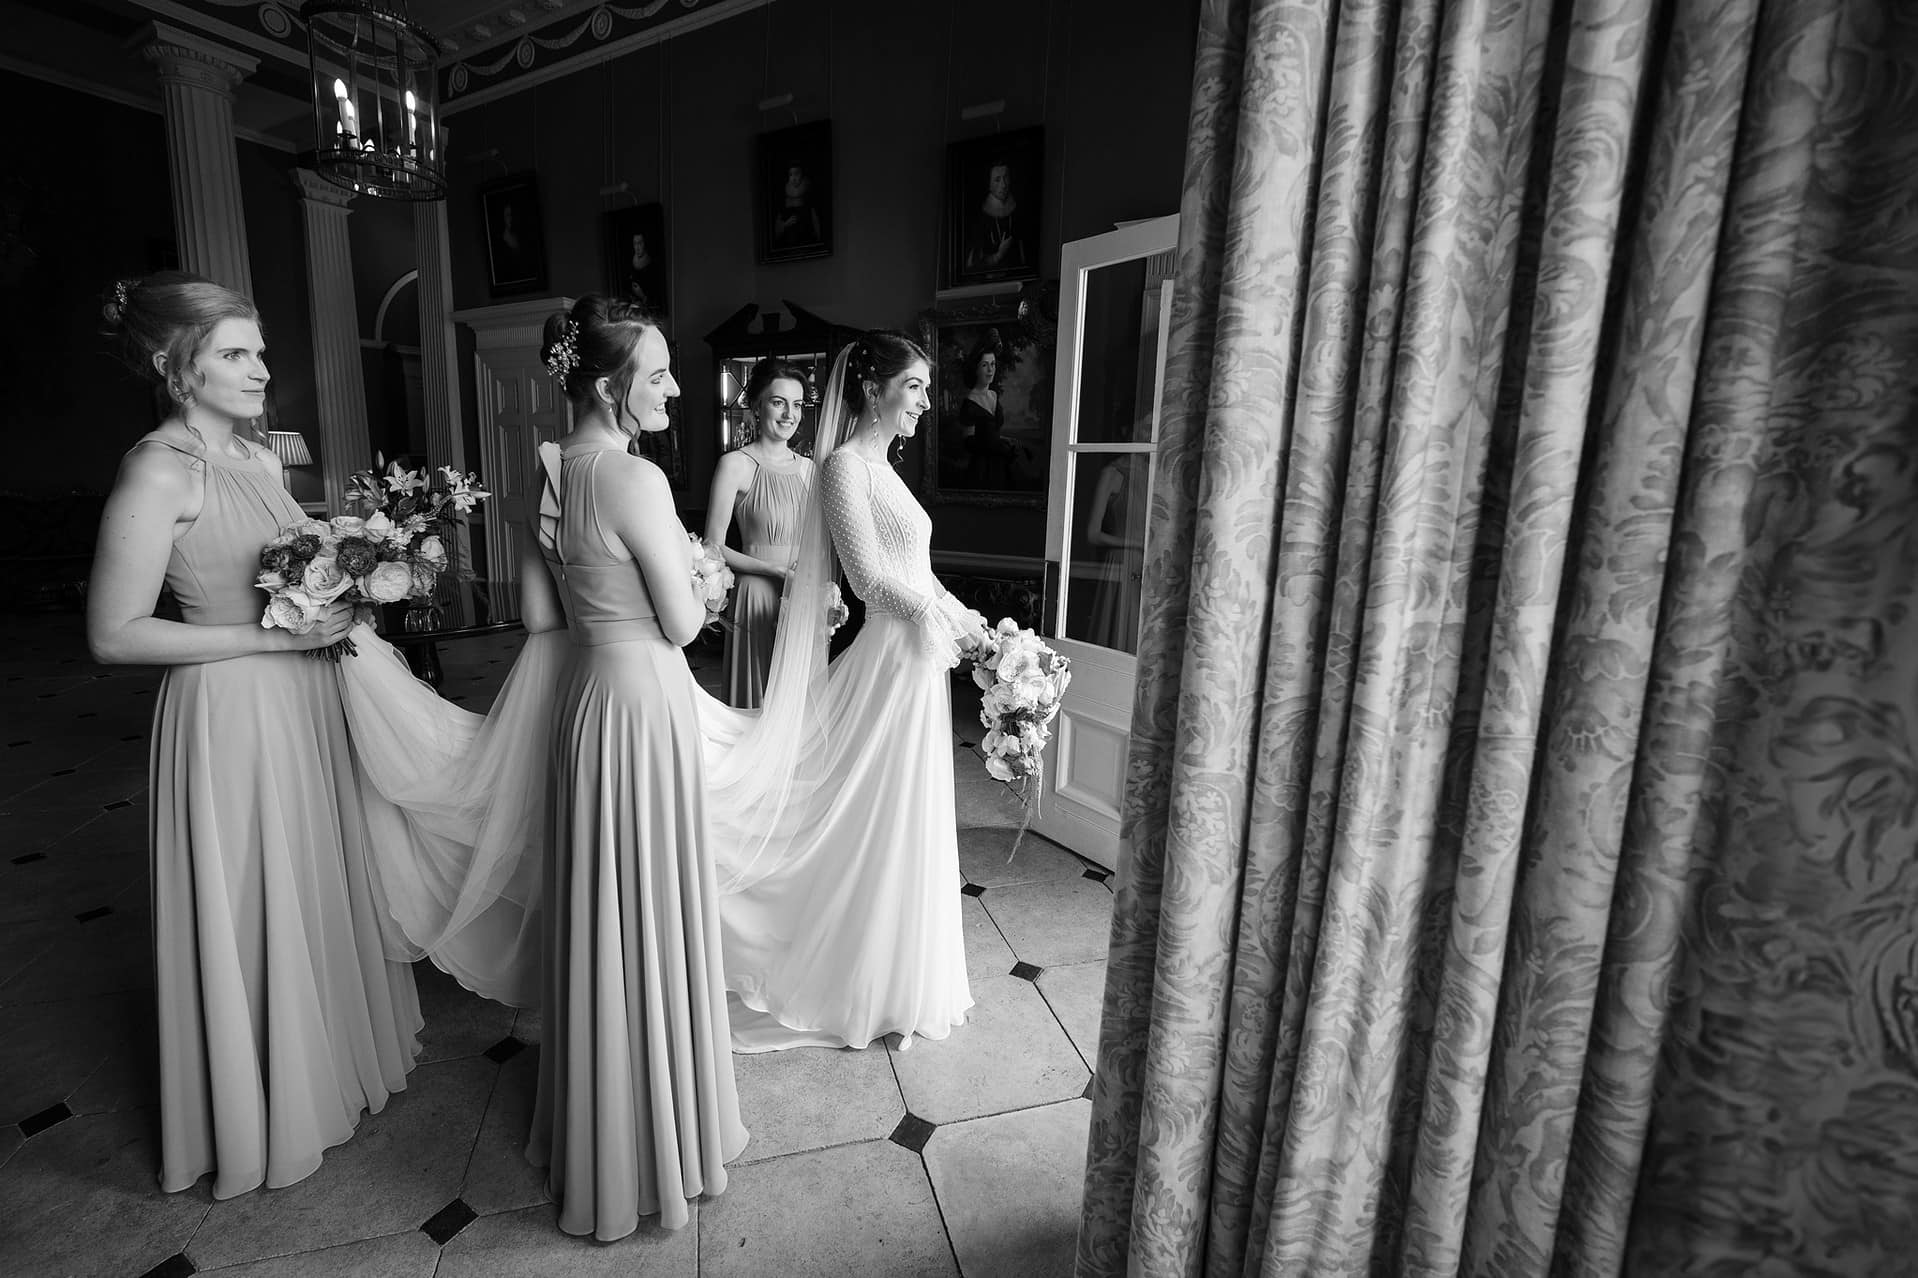 Bride and her bridesmaids about to walk out the door at Courteenhall to head to the church